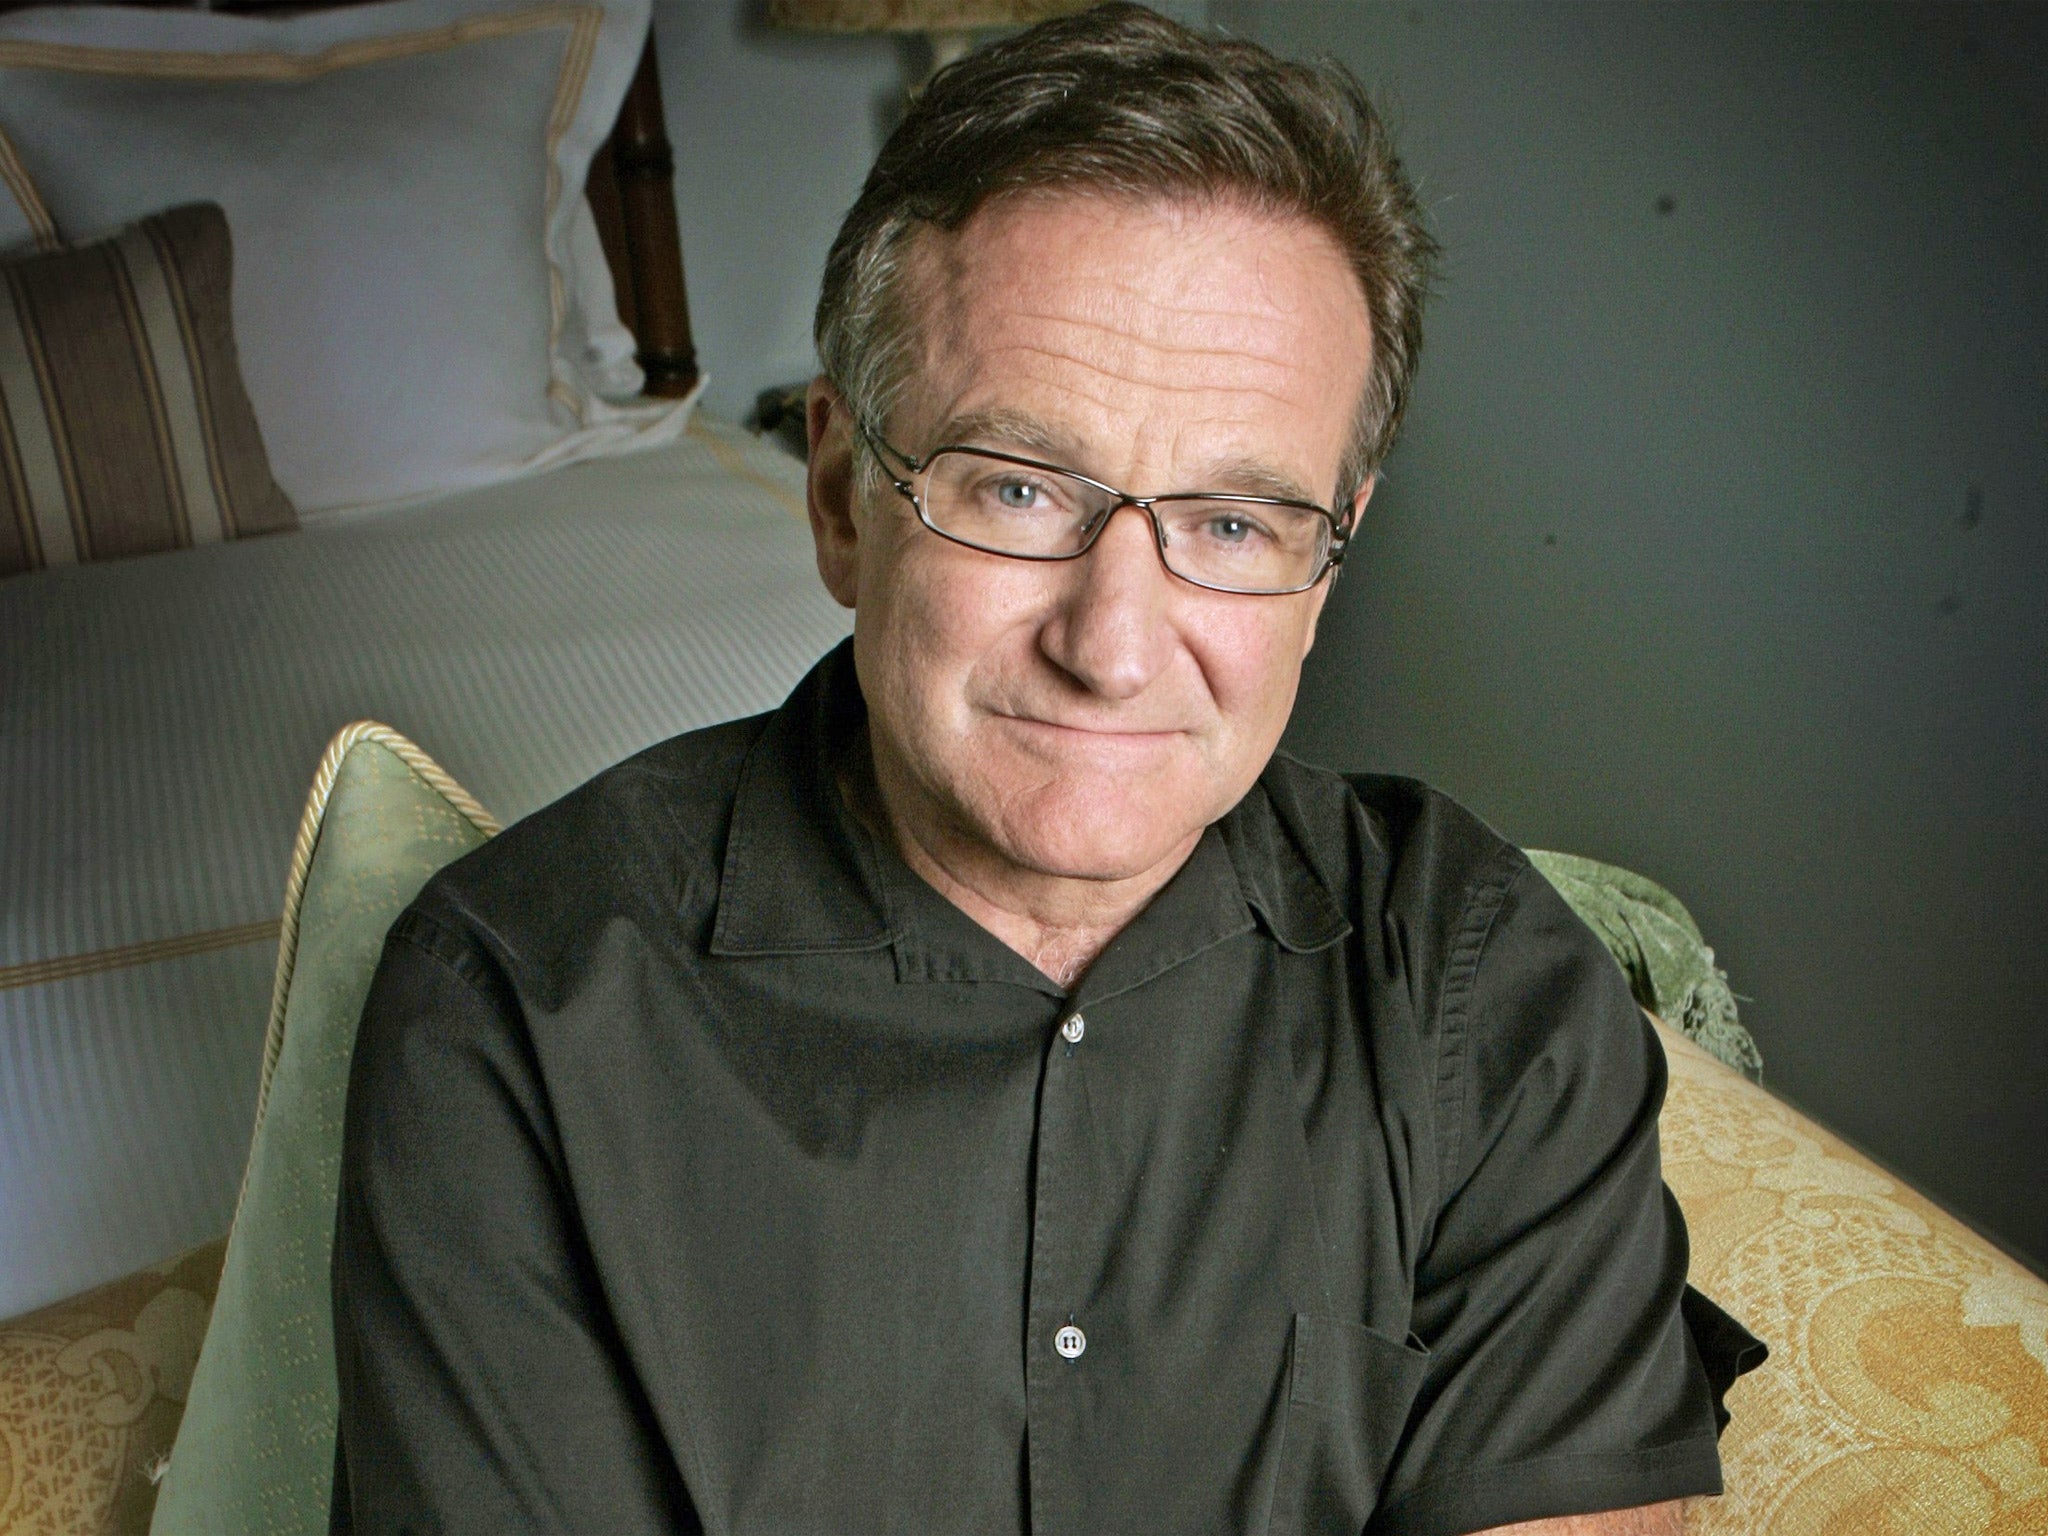 Robin Williams was found dead at his home on Sunday night